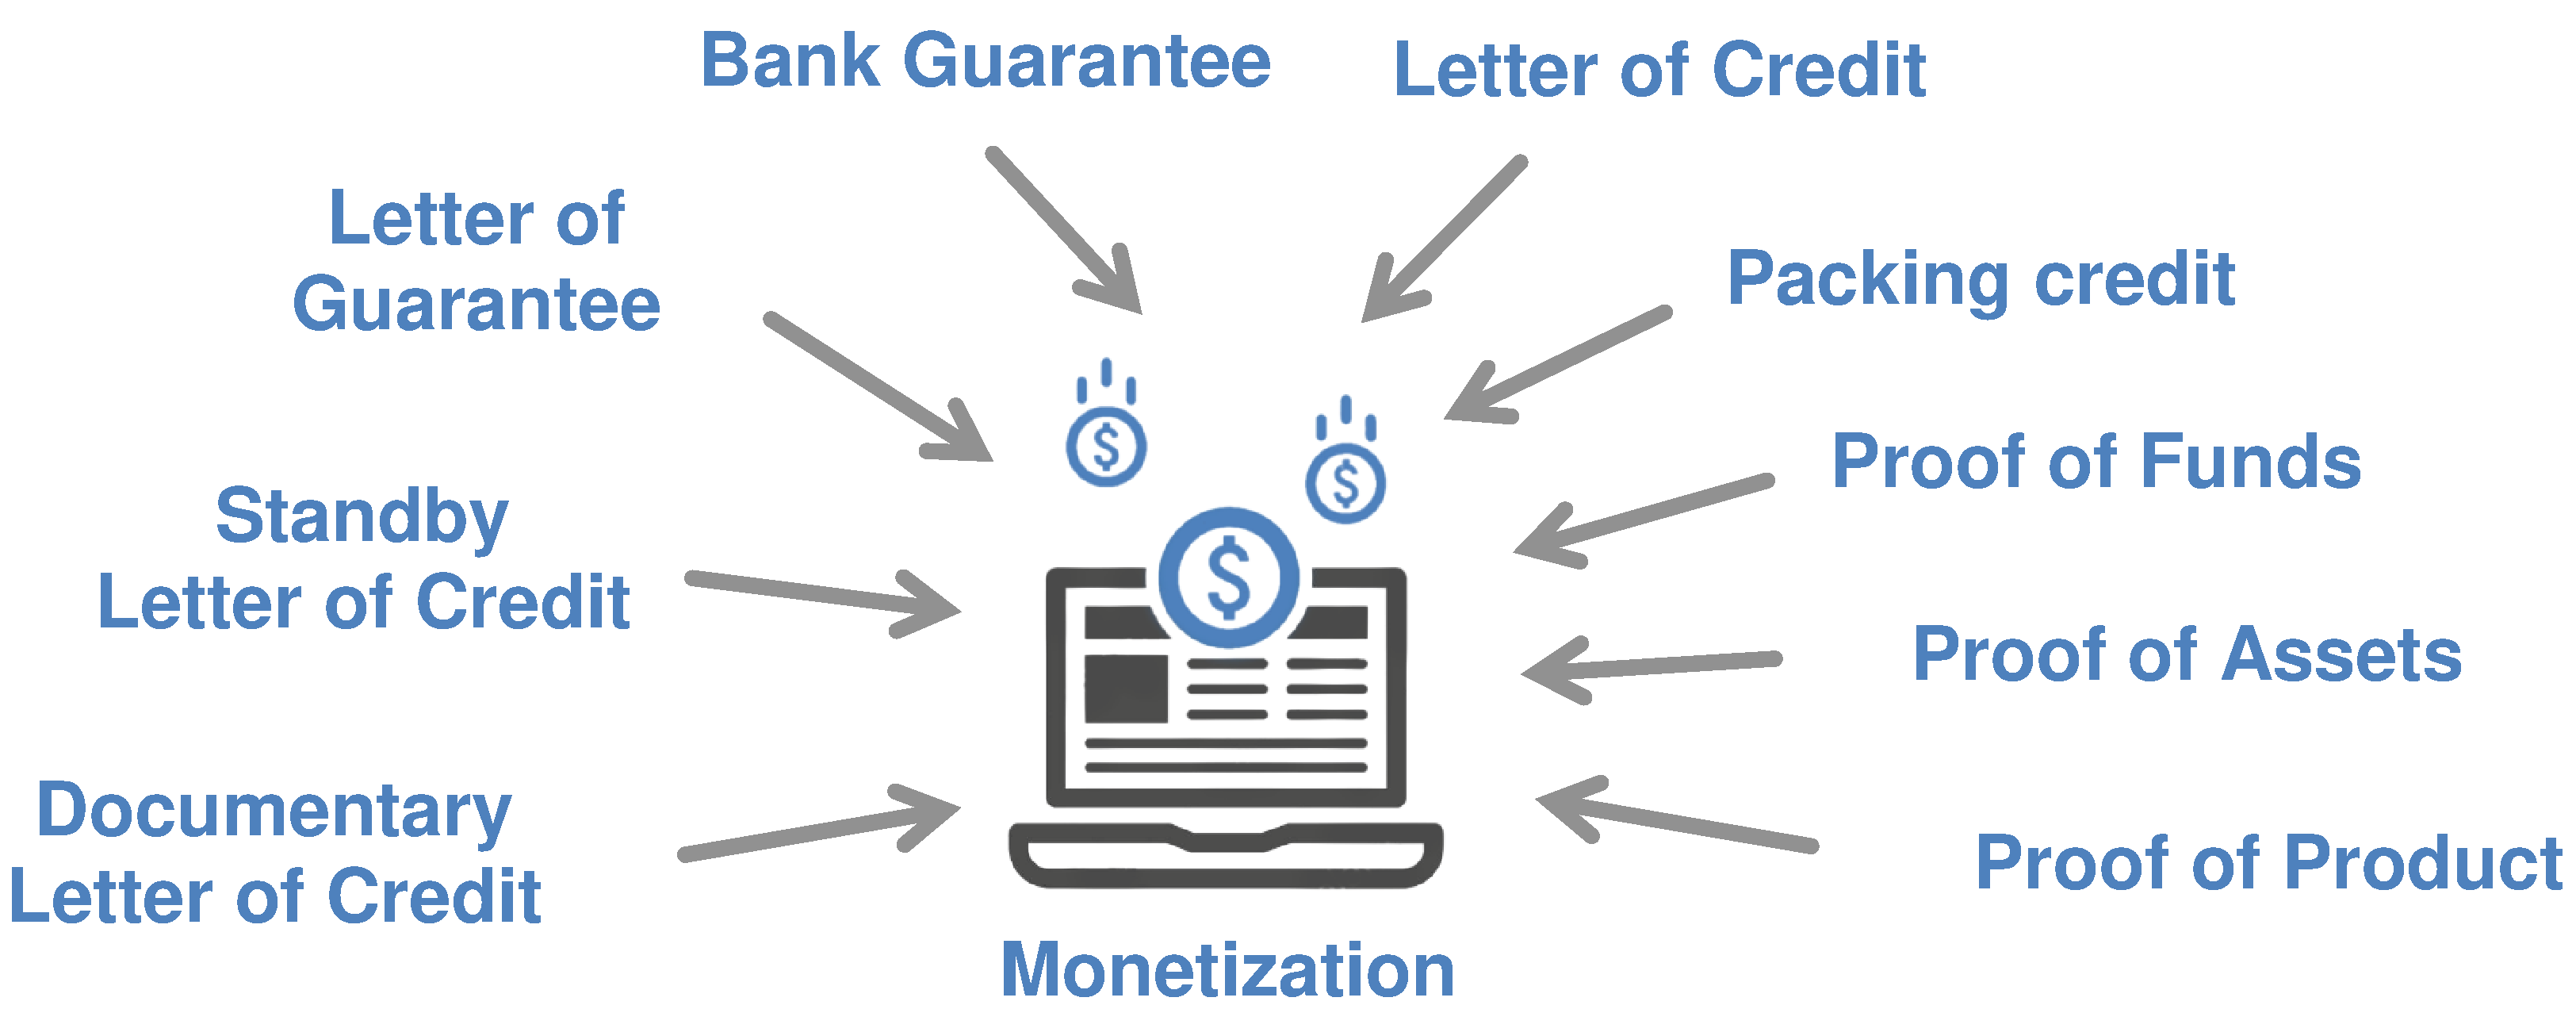 Monetization is a way to convert your company's assets into profits